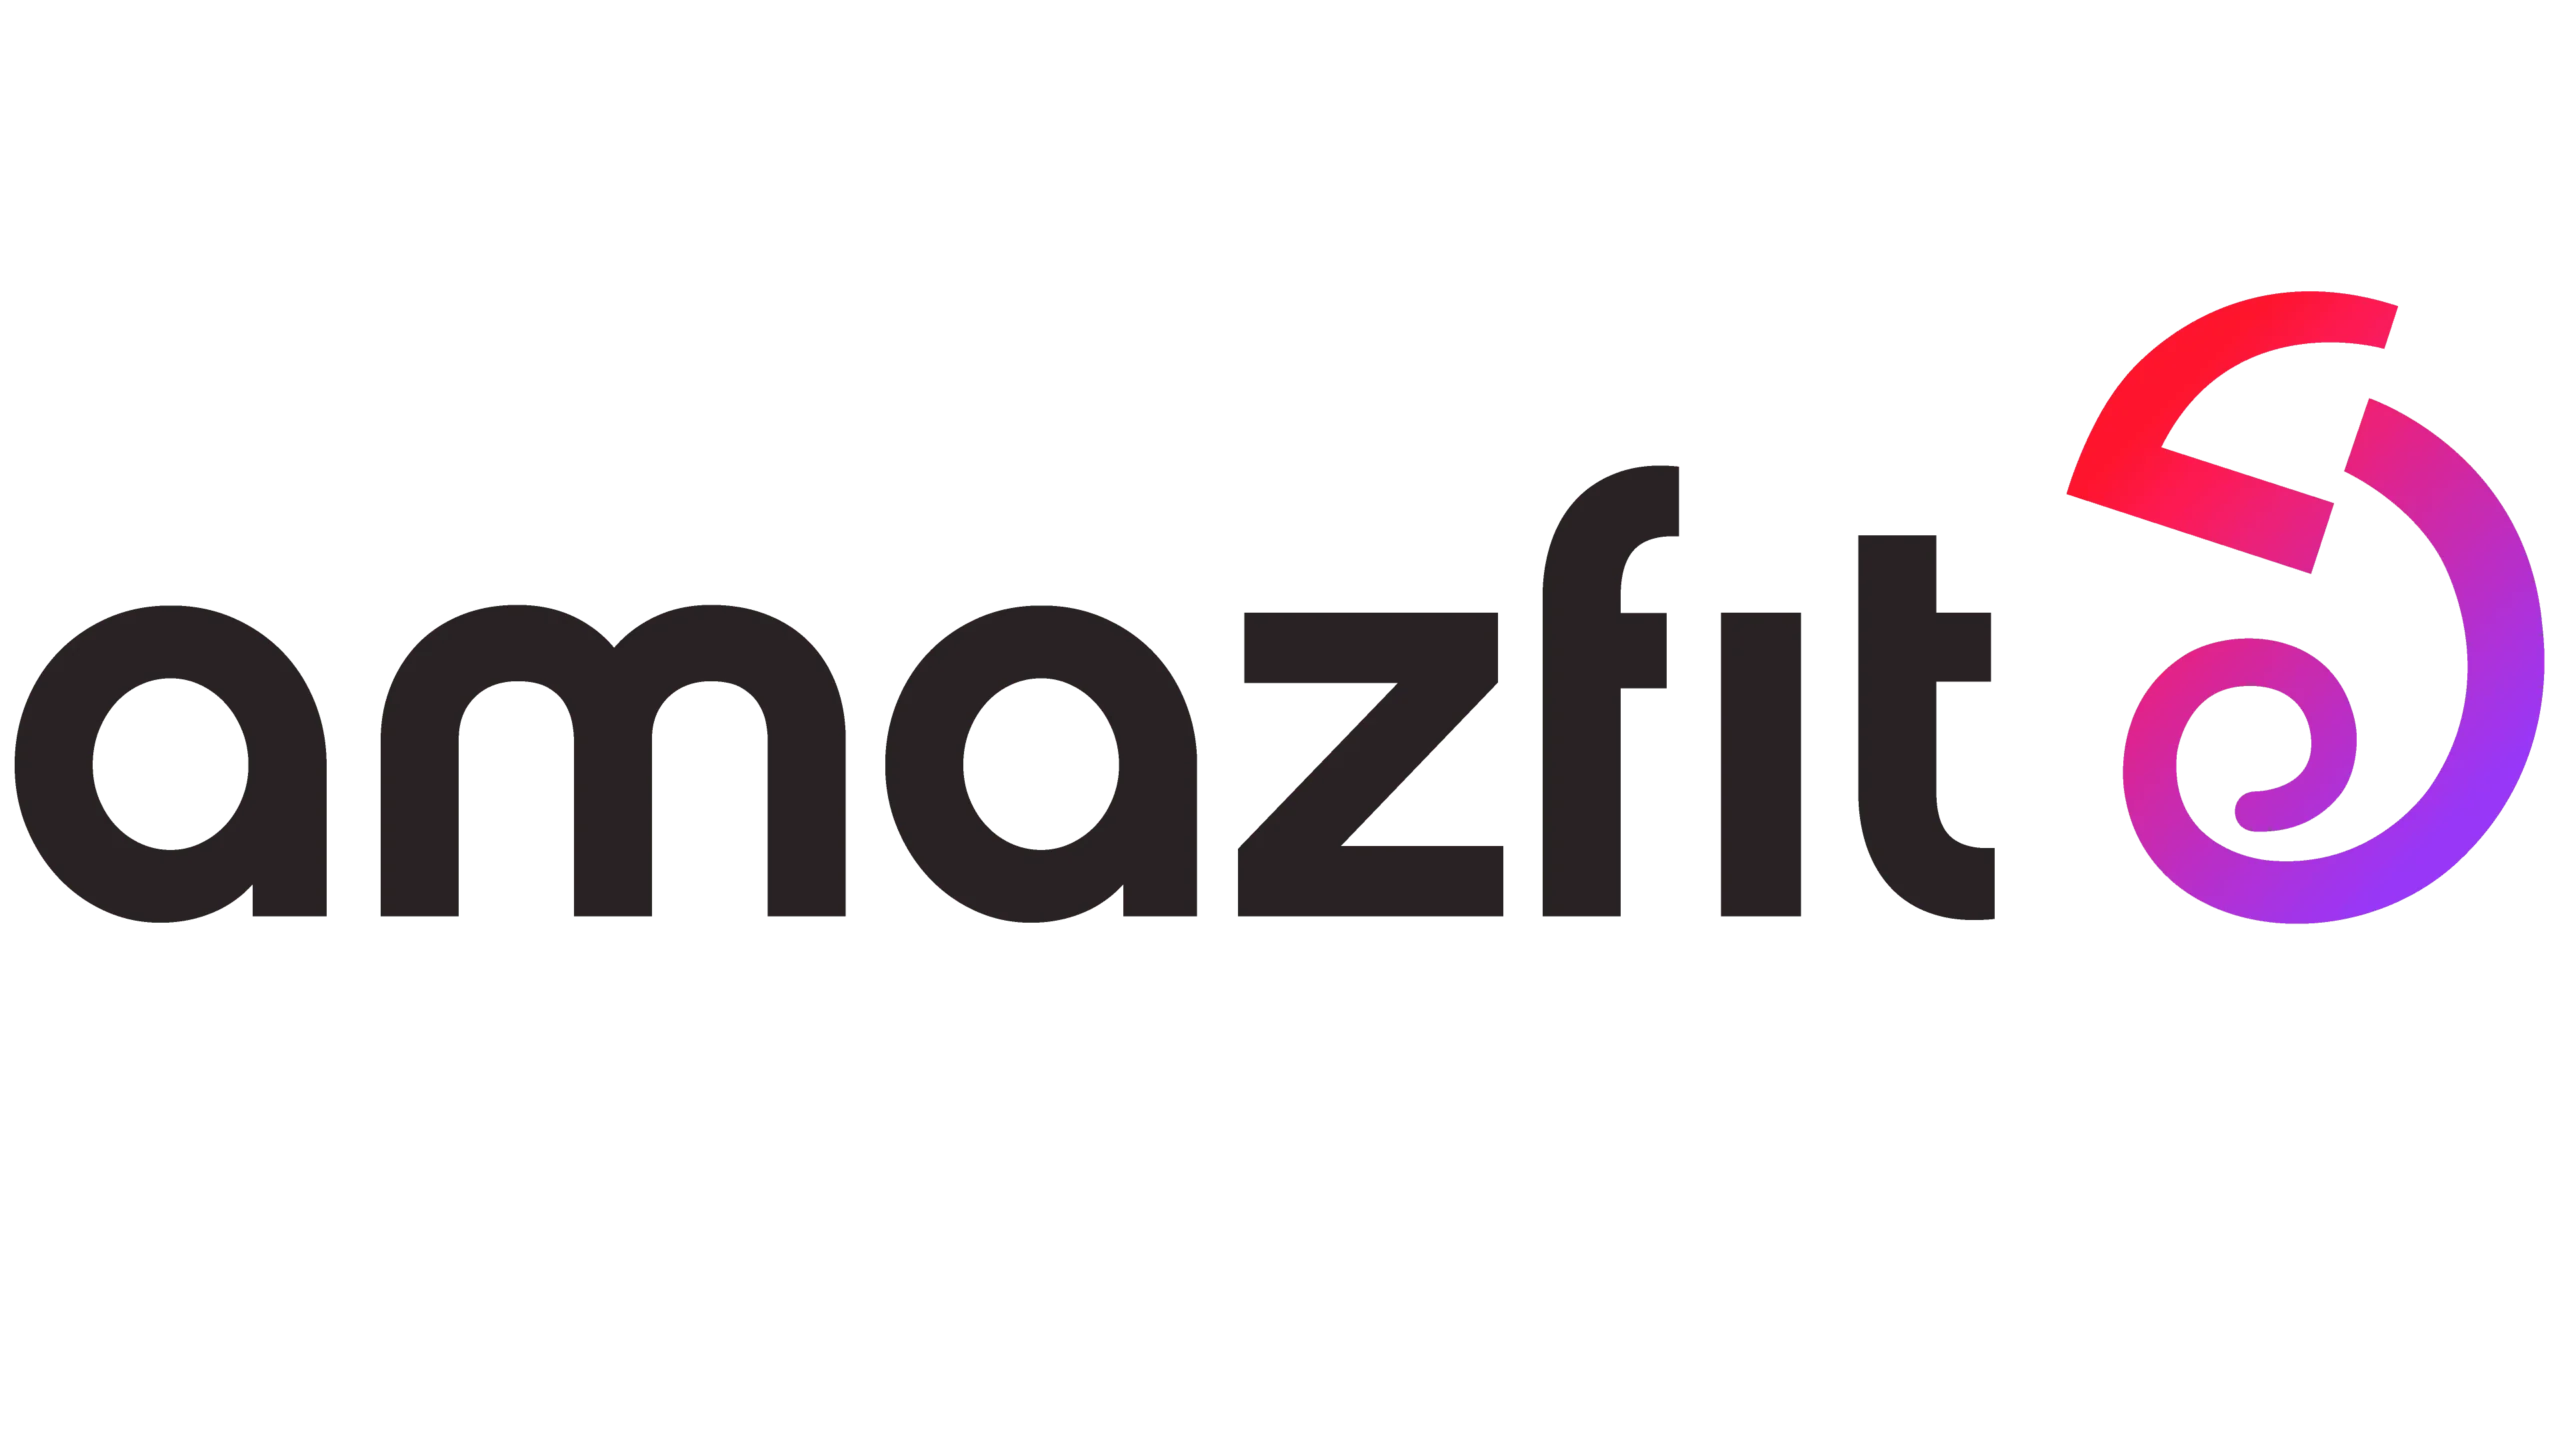 Amazfit Coupon: Grab Flat Rs 100 Off on Next Purchase + Free Shipping